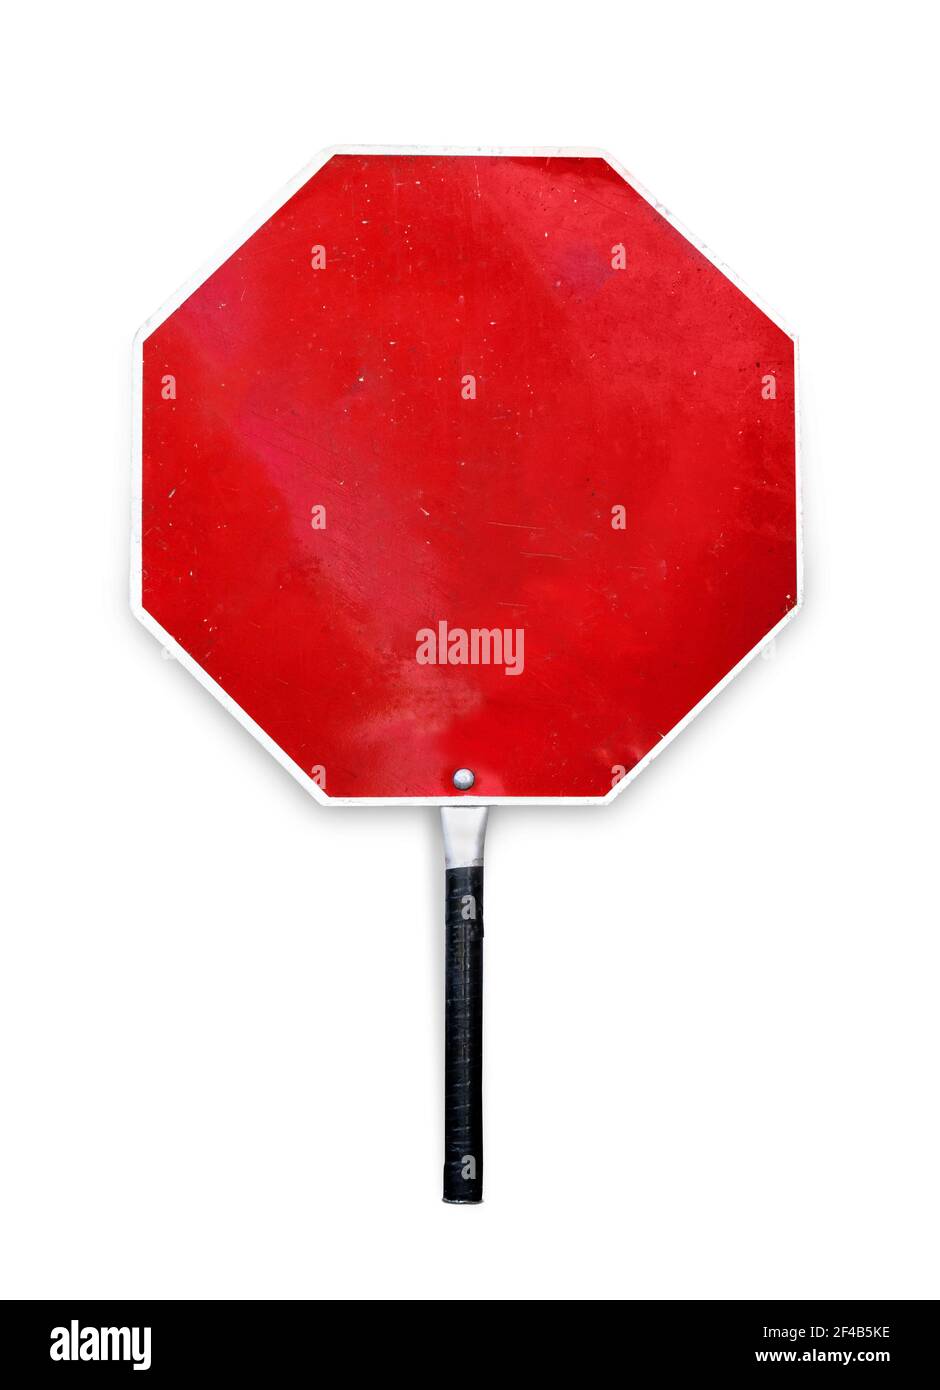 Blank stop sign used for traffic control by crossing guards, police or work zones. Hand-held paddle stop sign template or mockup. Aged red metal textu Stock Photo